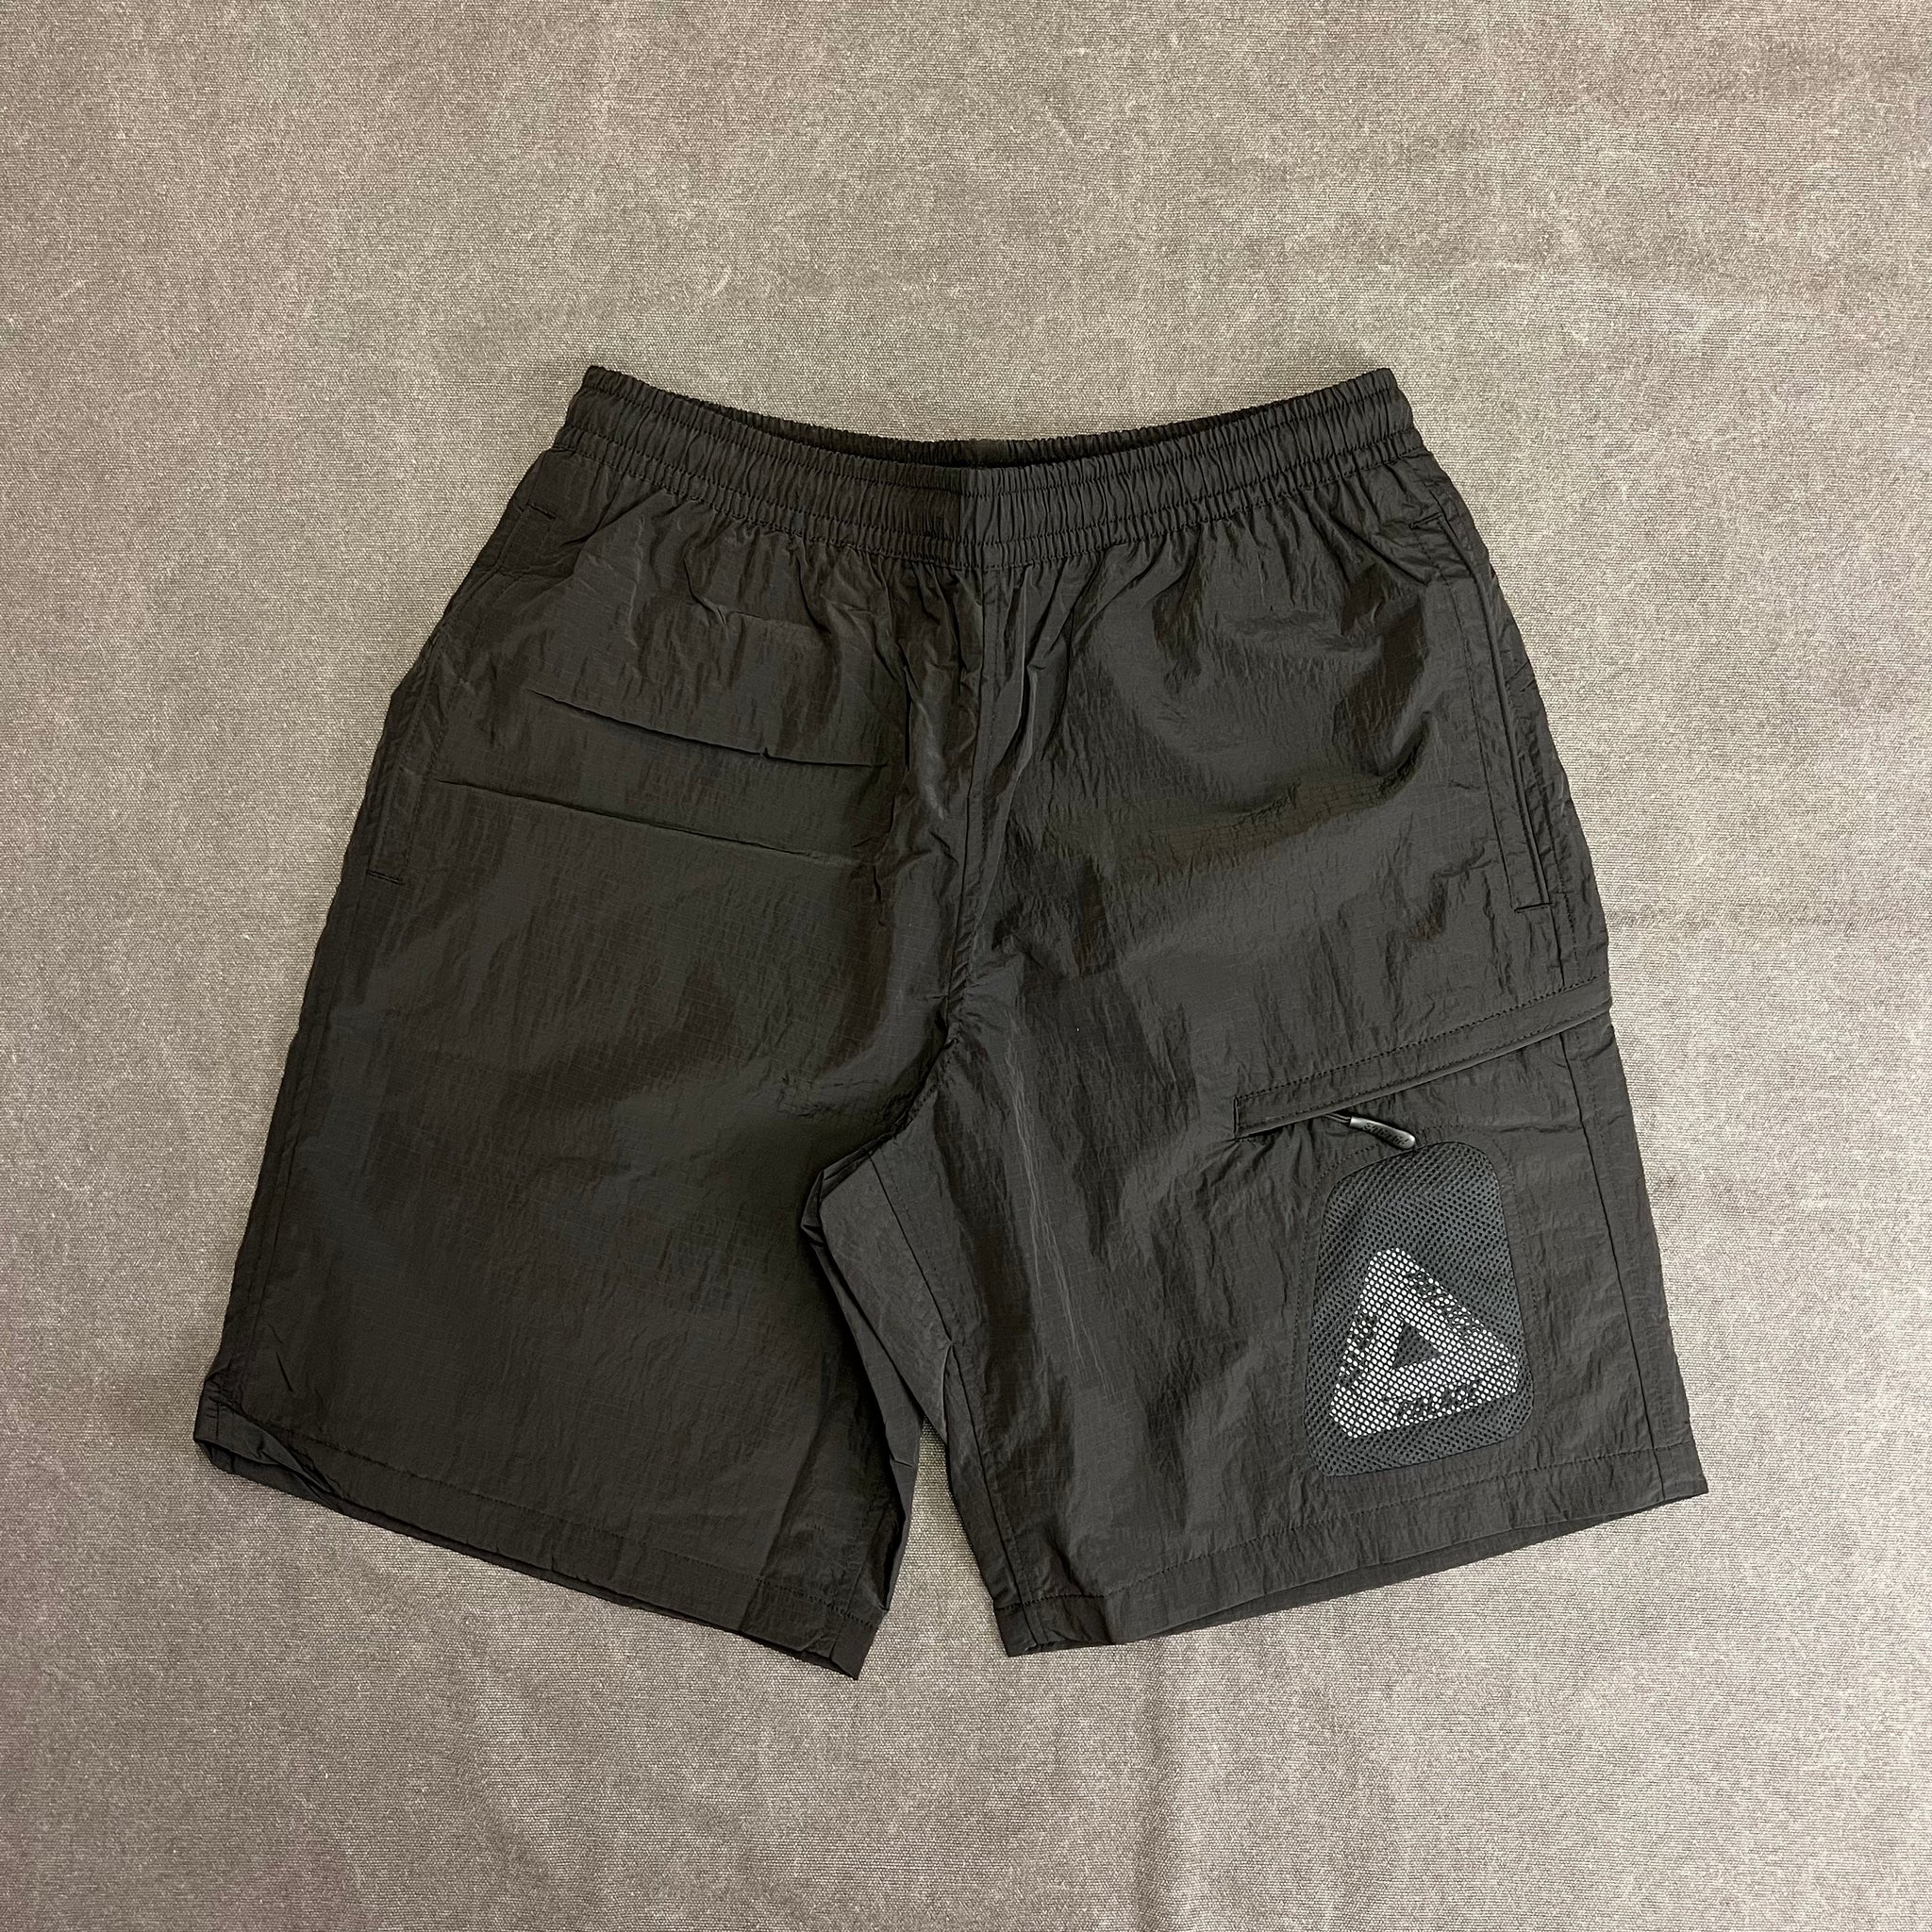 PALACE SKATEBOARDS Y-RIPSTOP SHELL SHORT – Trade Point_HK